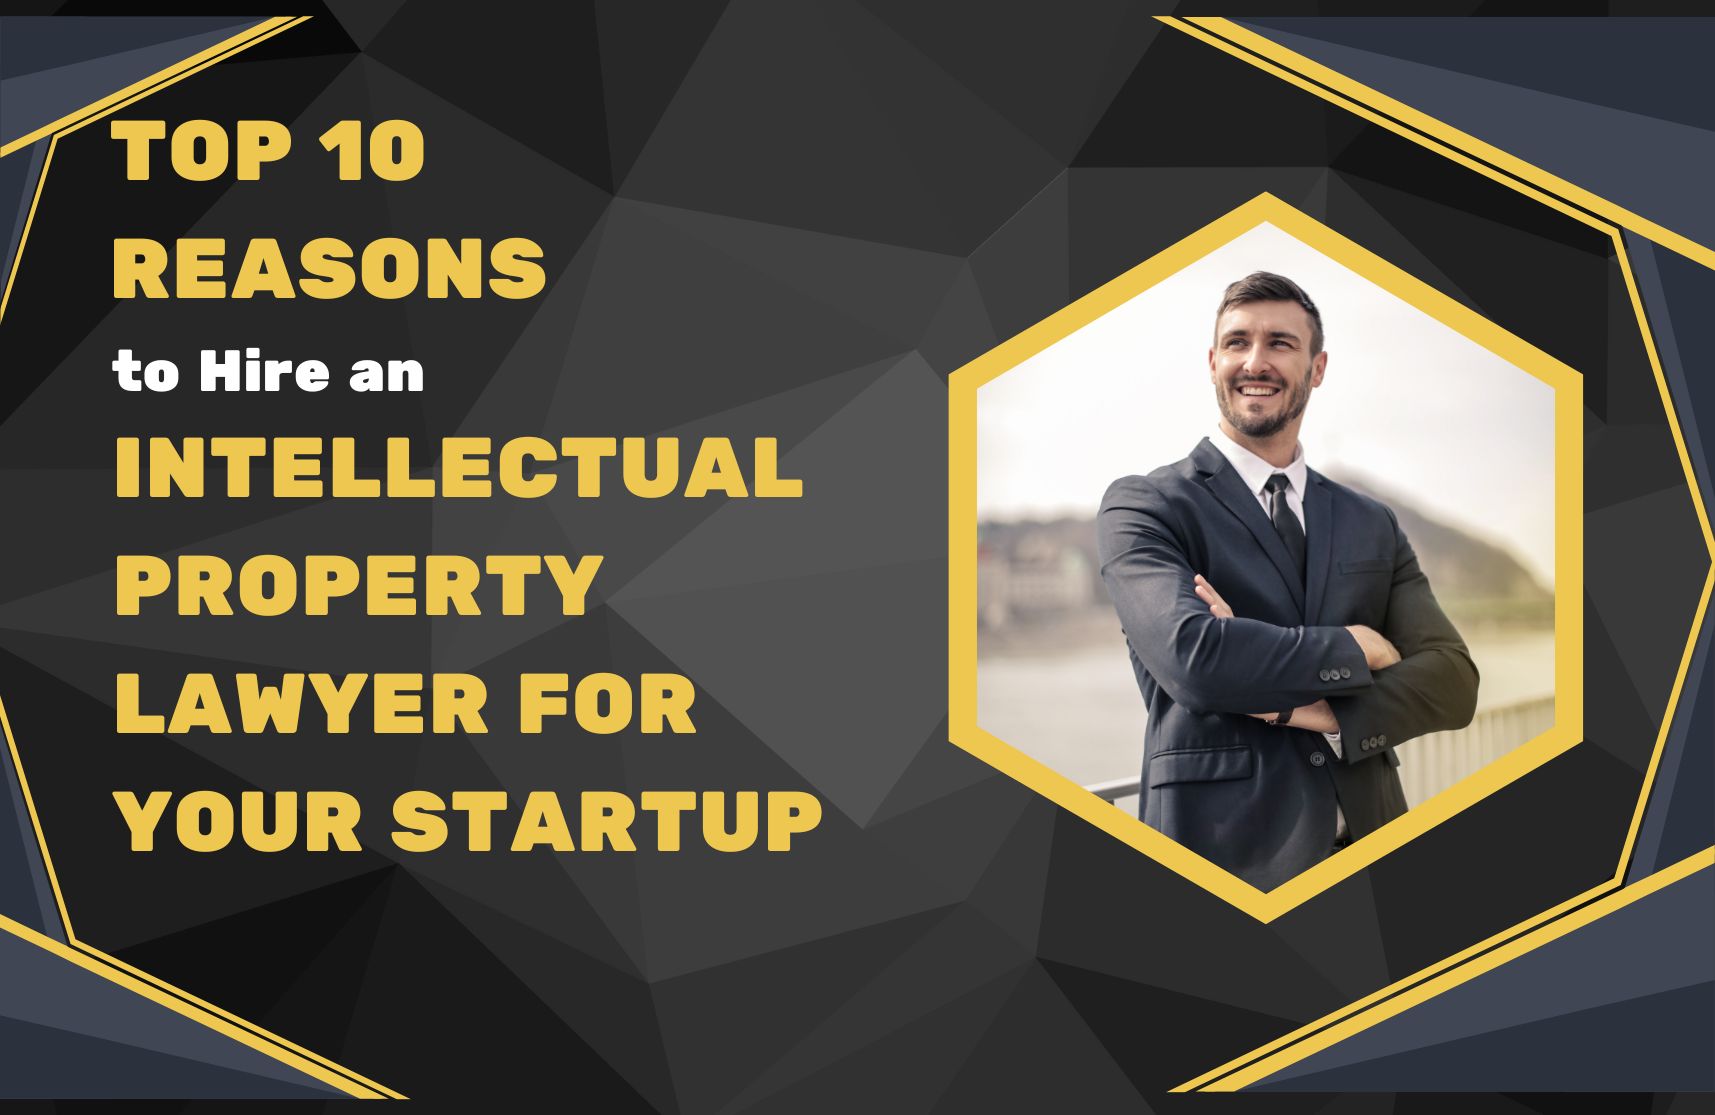 Top 10 Reasons to Hire an Intellectual Property Lawyer for Your Startup